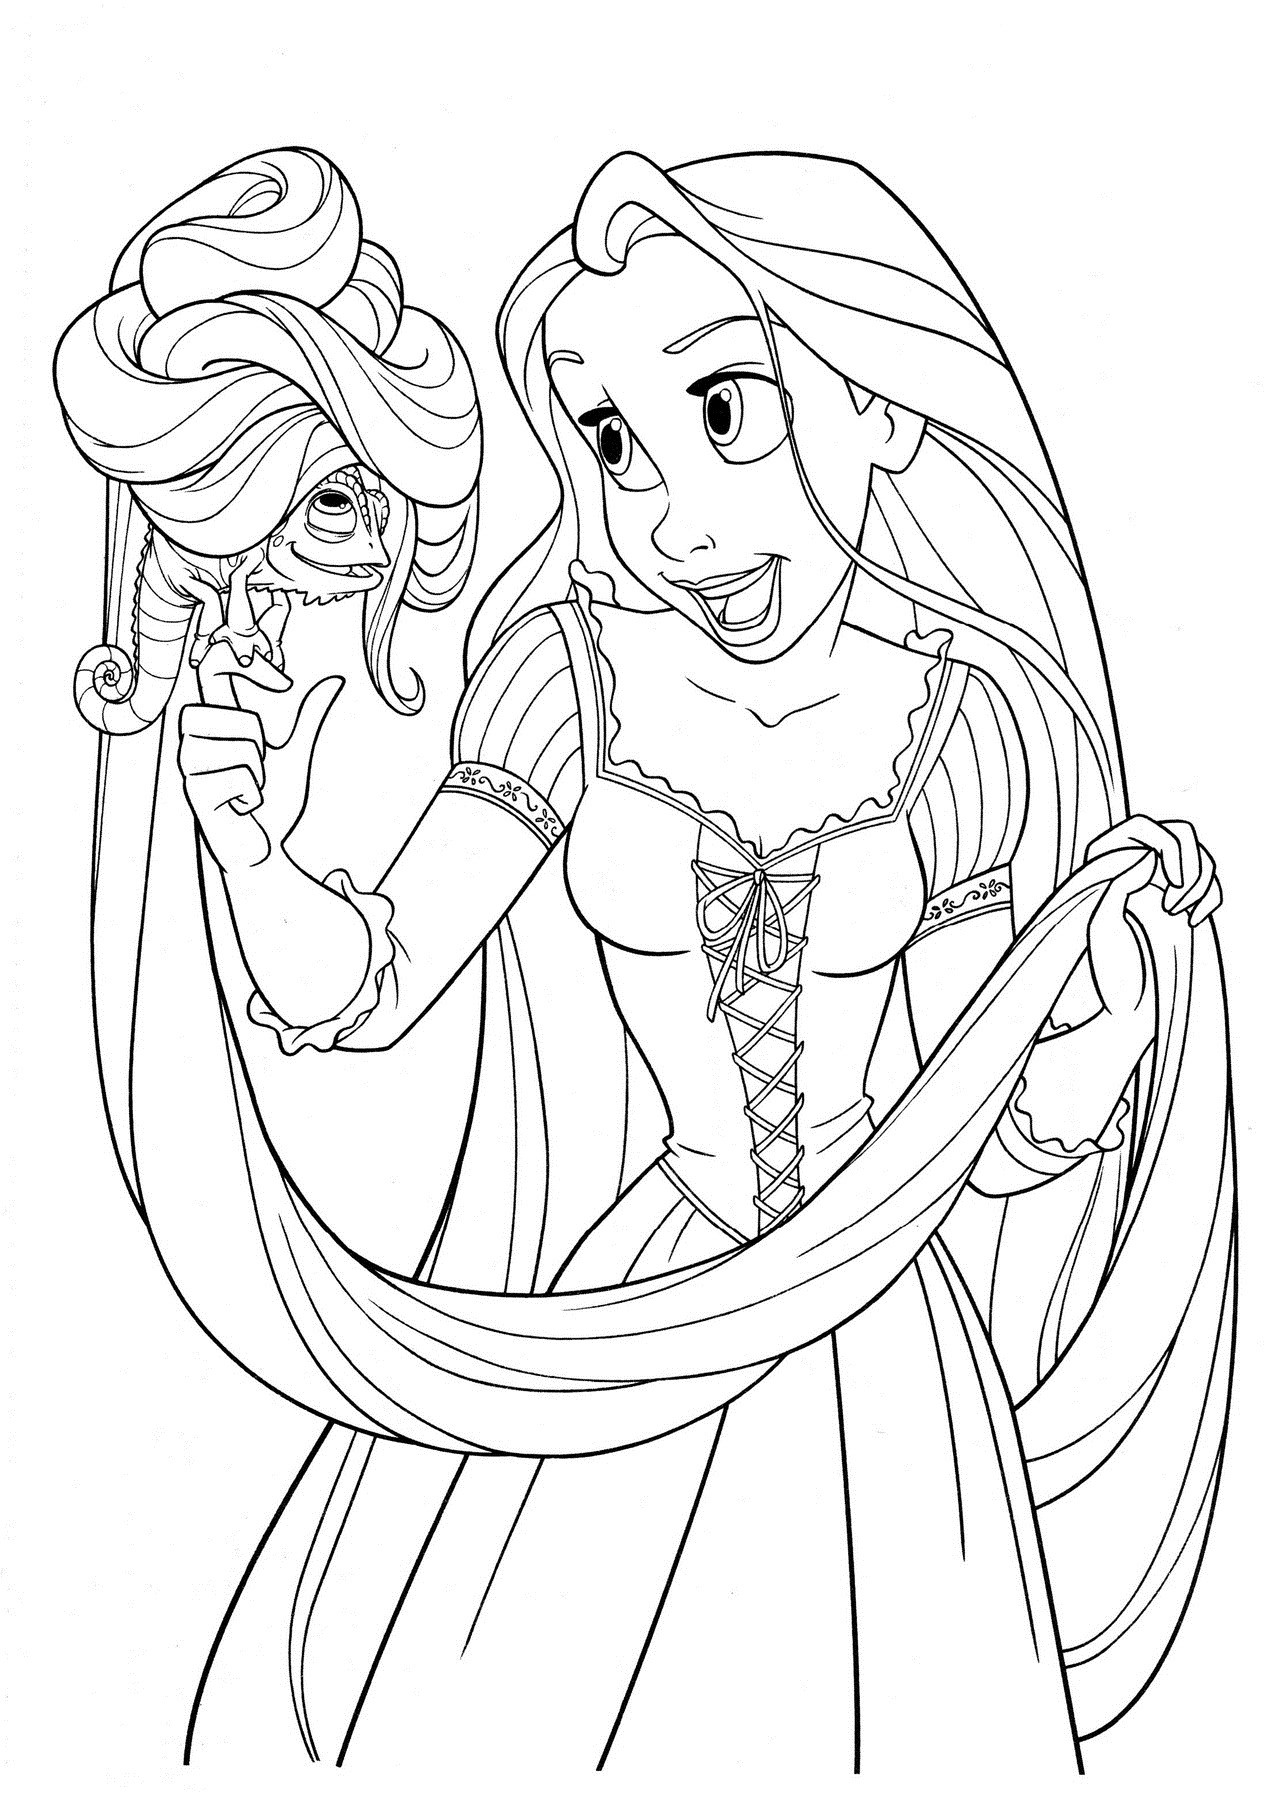 Toddler Coloring Sheets Free Printables
 Free Printable Tangled Coloring Pages For Kids